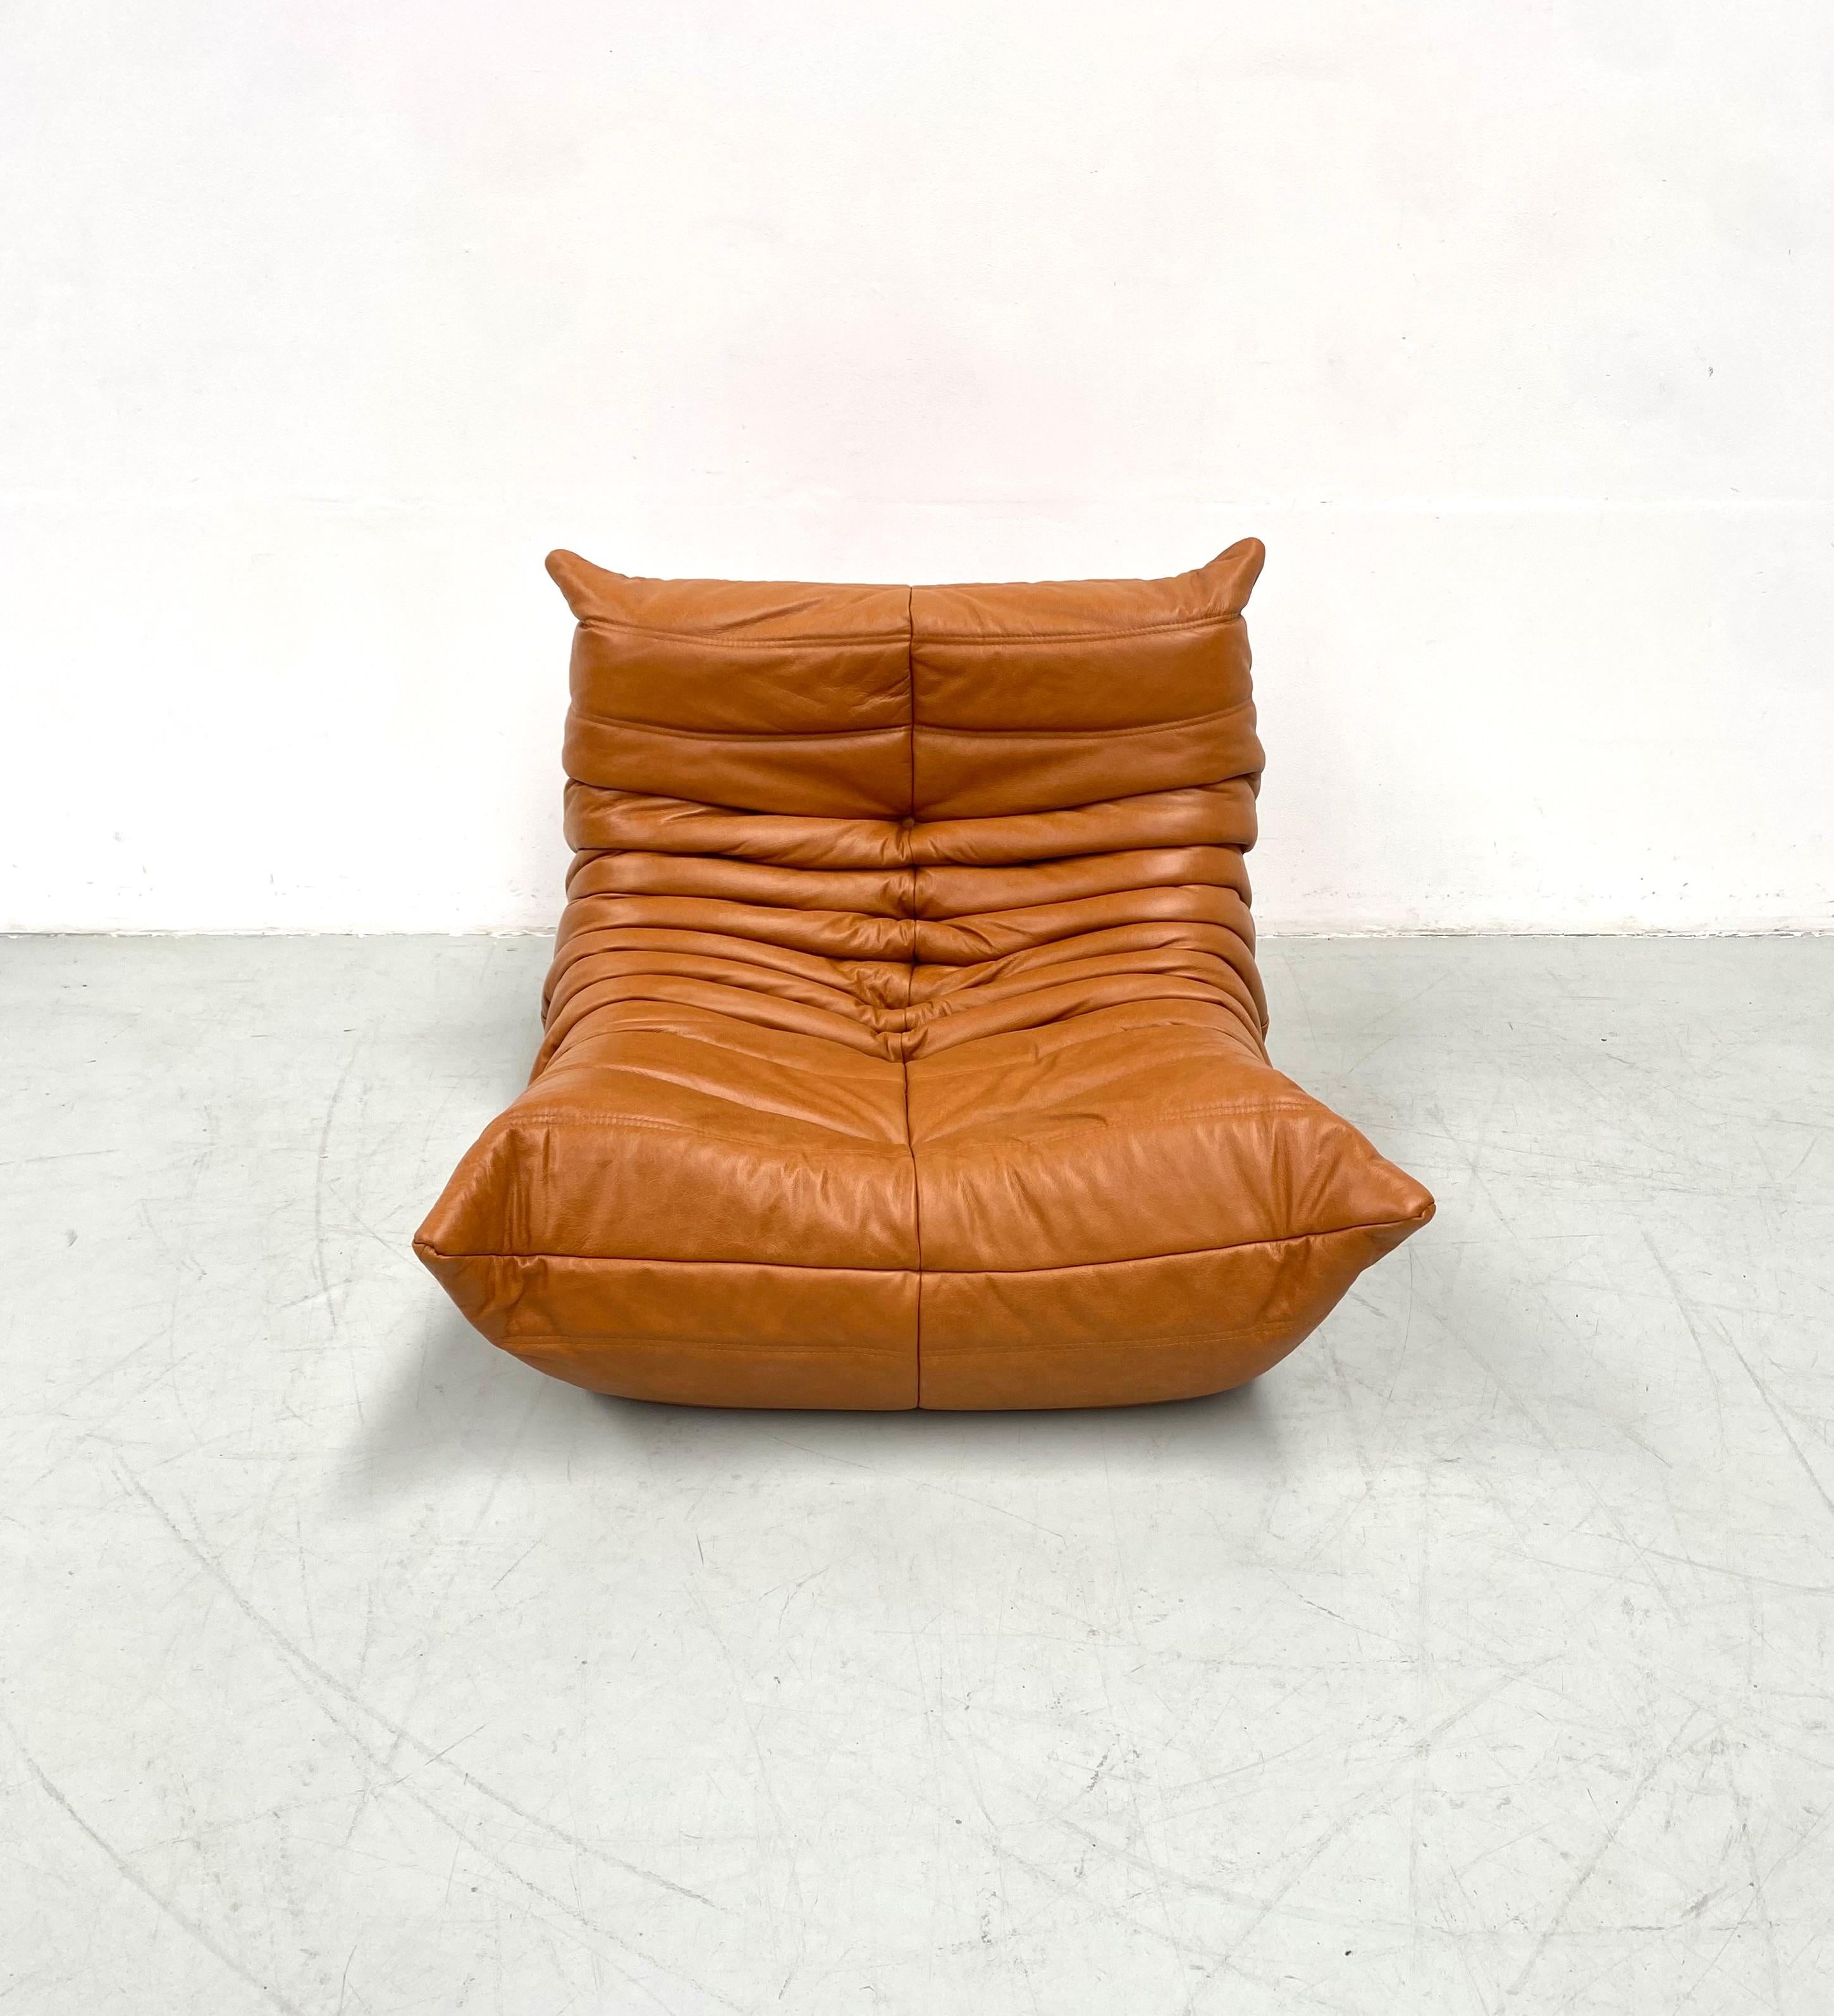 French Togo Chair in Light Brown Leather by Michel Ducaroy for Ligne Roset. 1